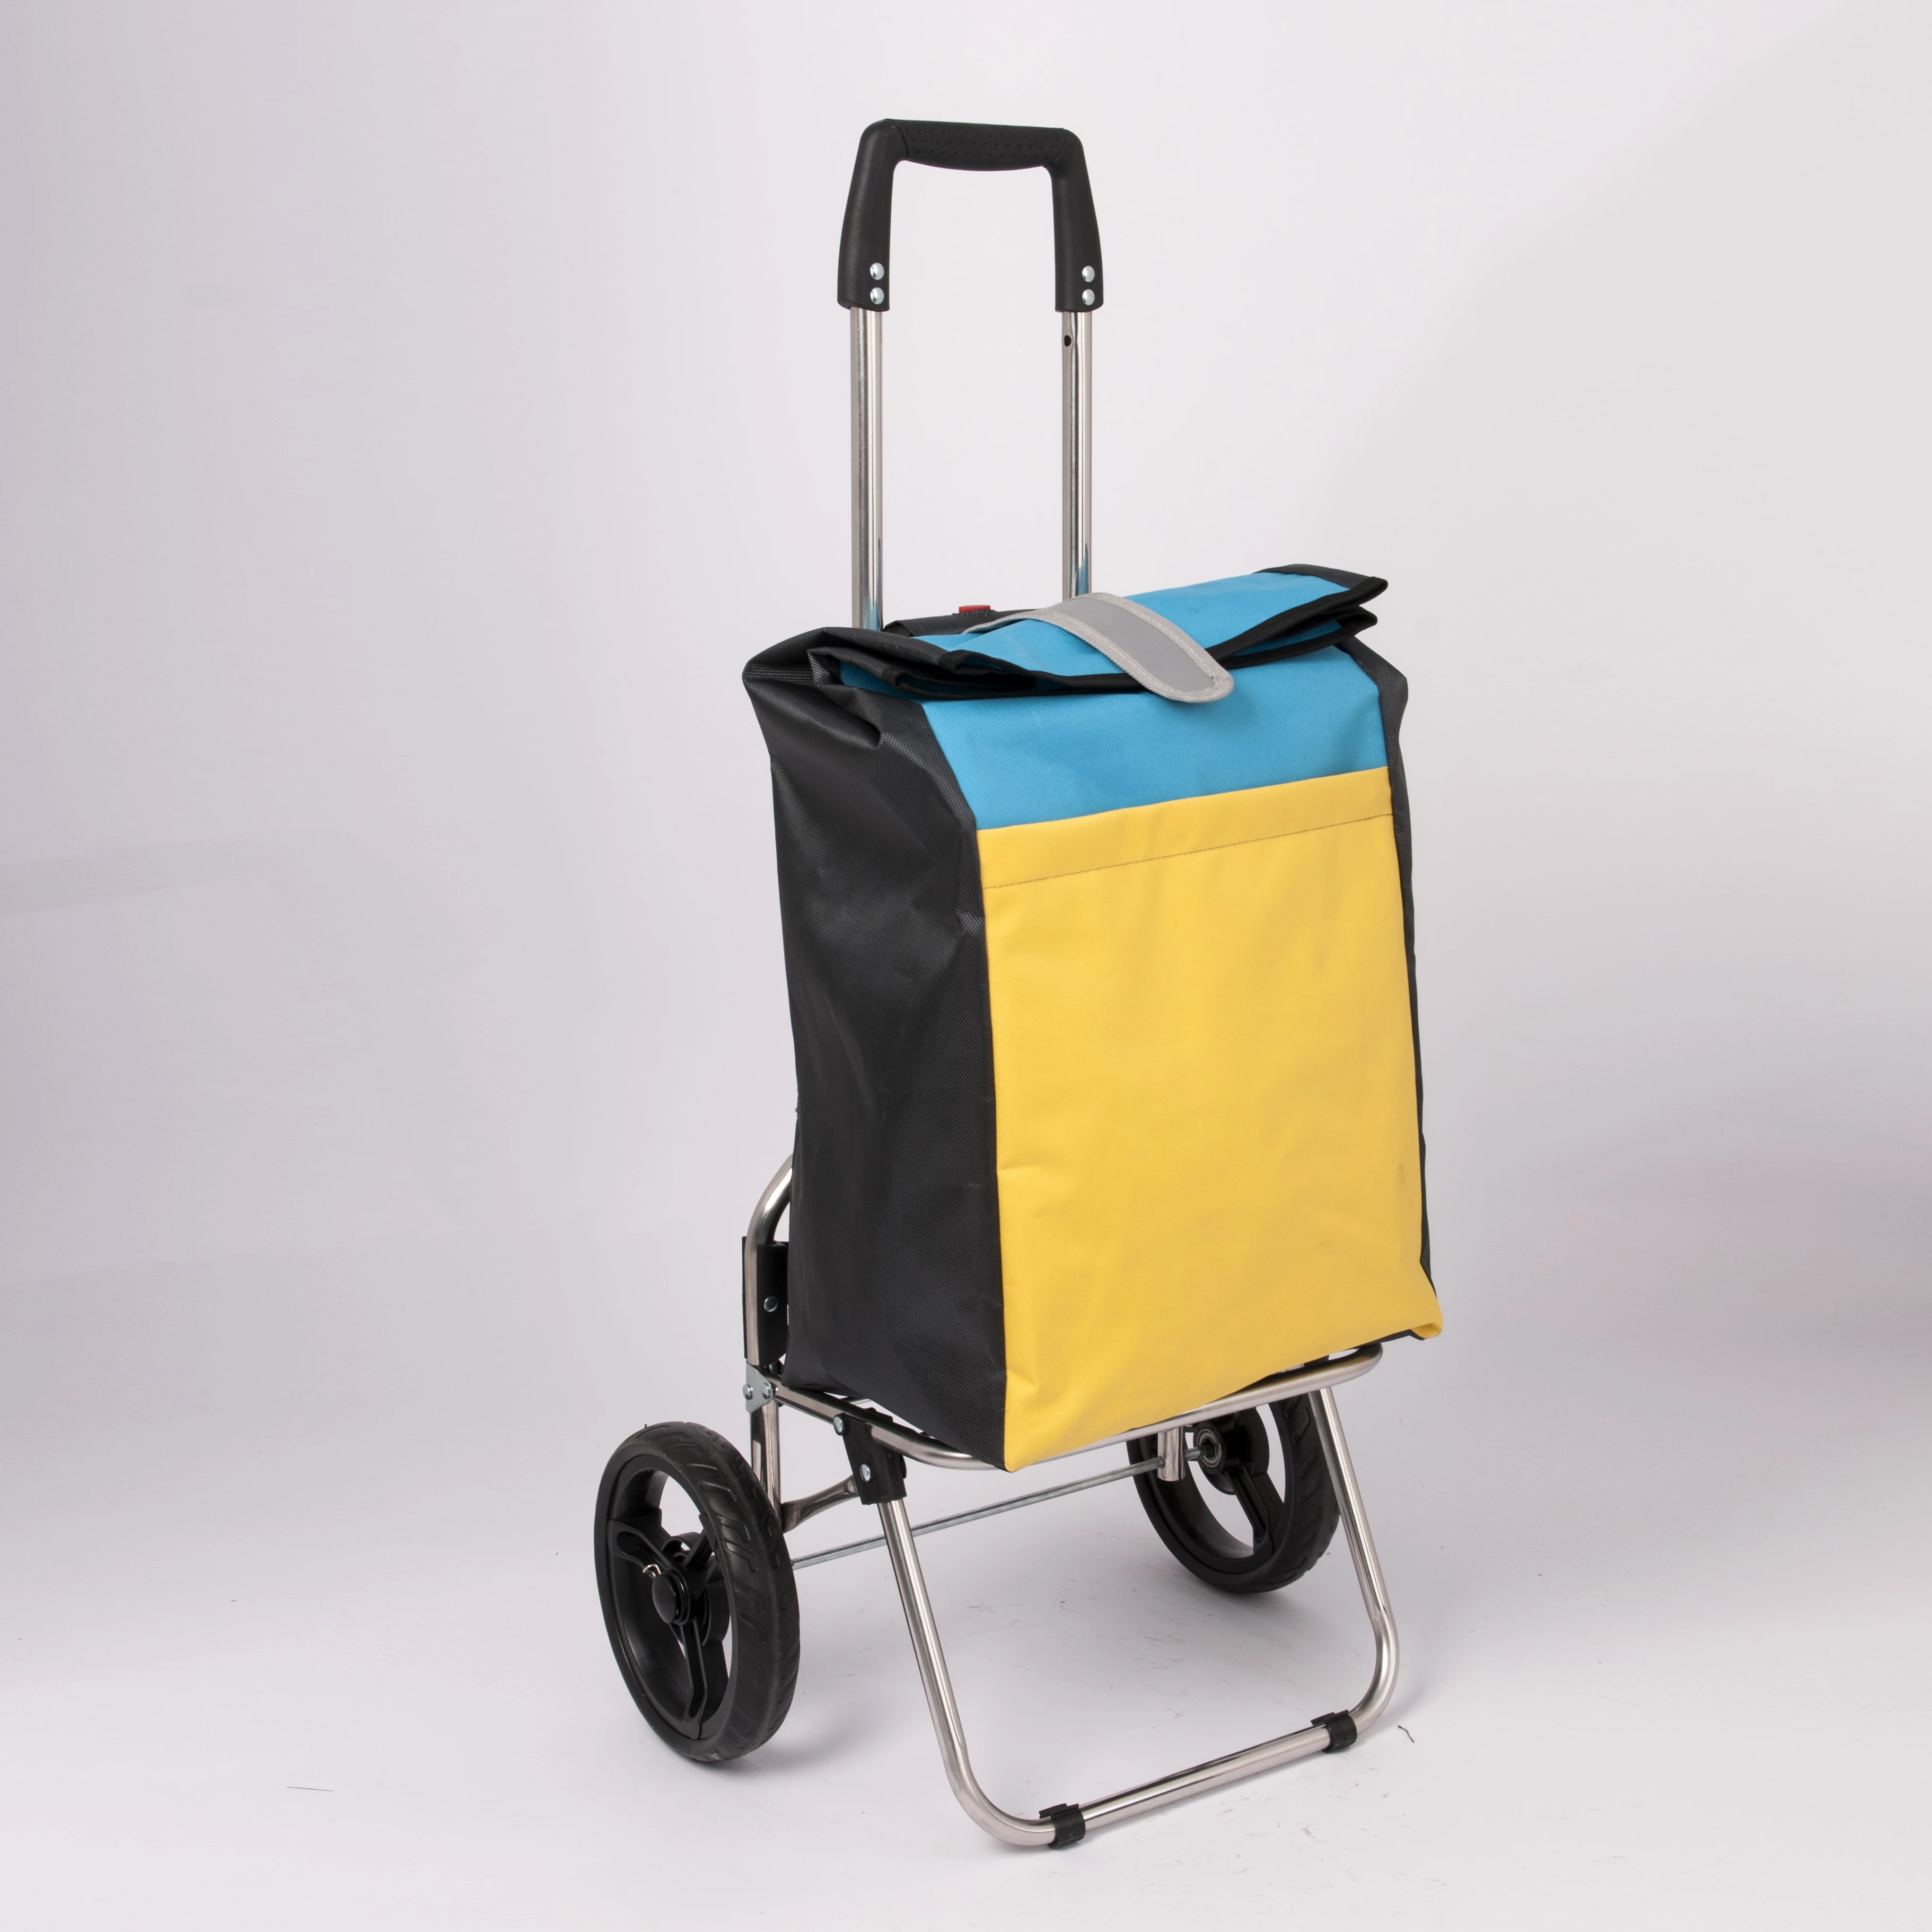 2 wheels  light weigh vegetable shopping trolley bag cheap canvas grocery foldable mini shopping cart